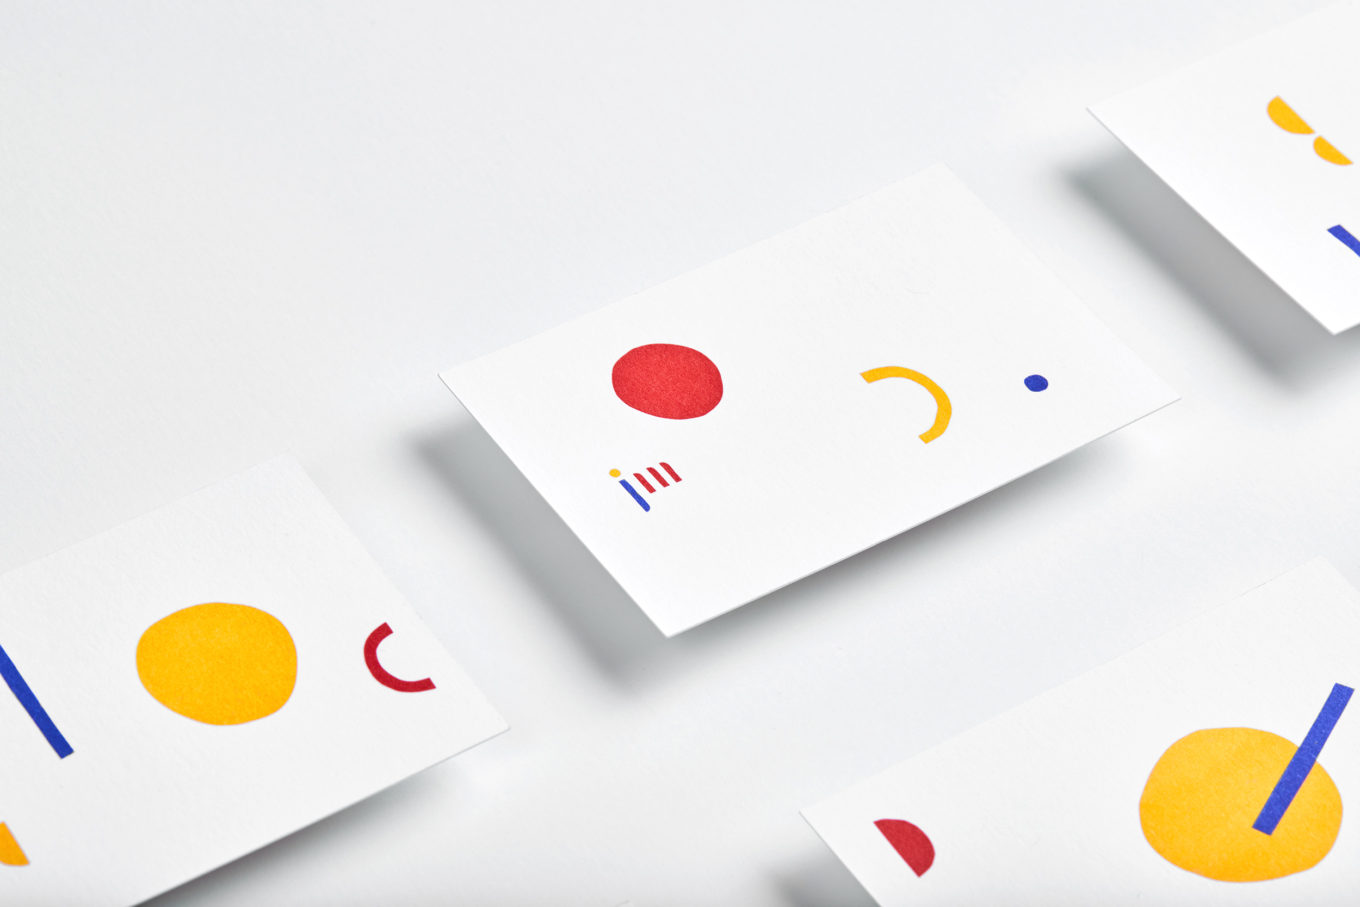 Brand identity and business cards for teething jewellery brand January Moon by Perky Bros